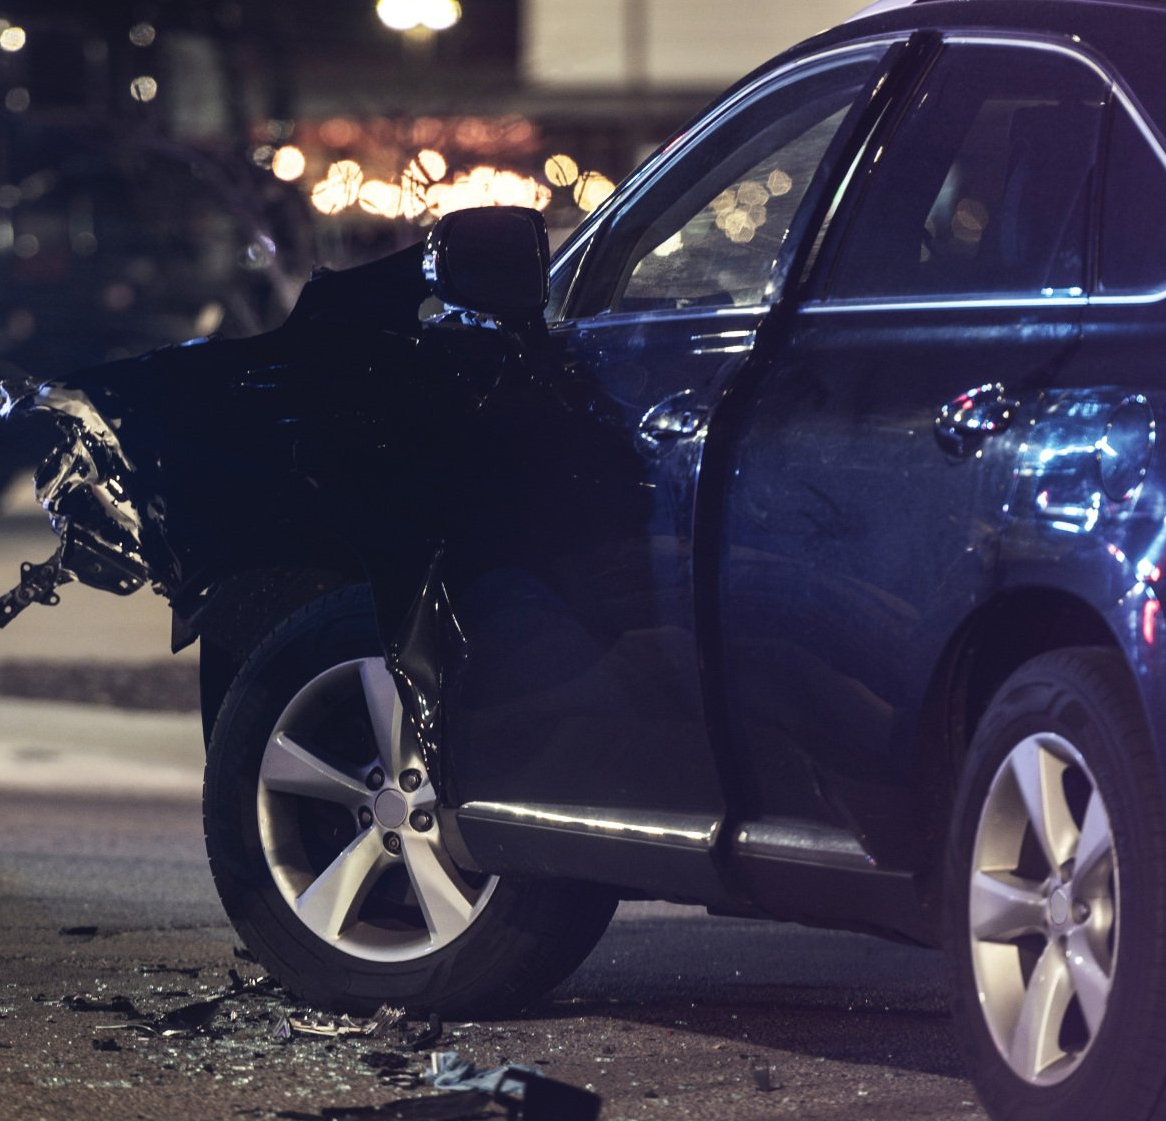 Distracted Driving Is Never Worth It. Call Harper Evans Hilbrenner & Netemeyer in Columbia, MO.